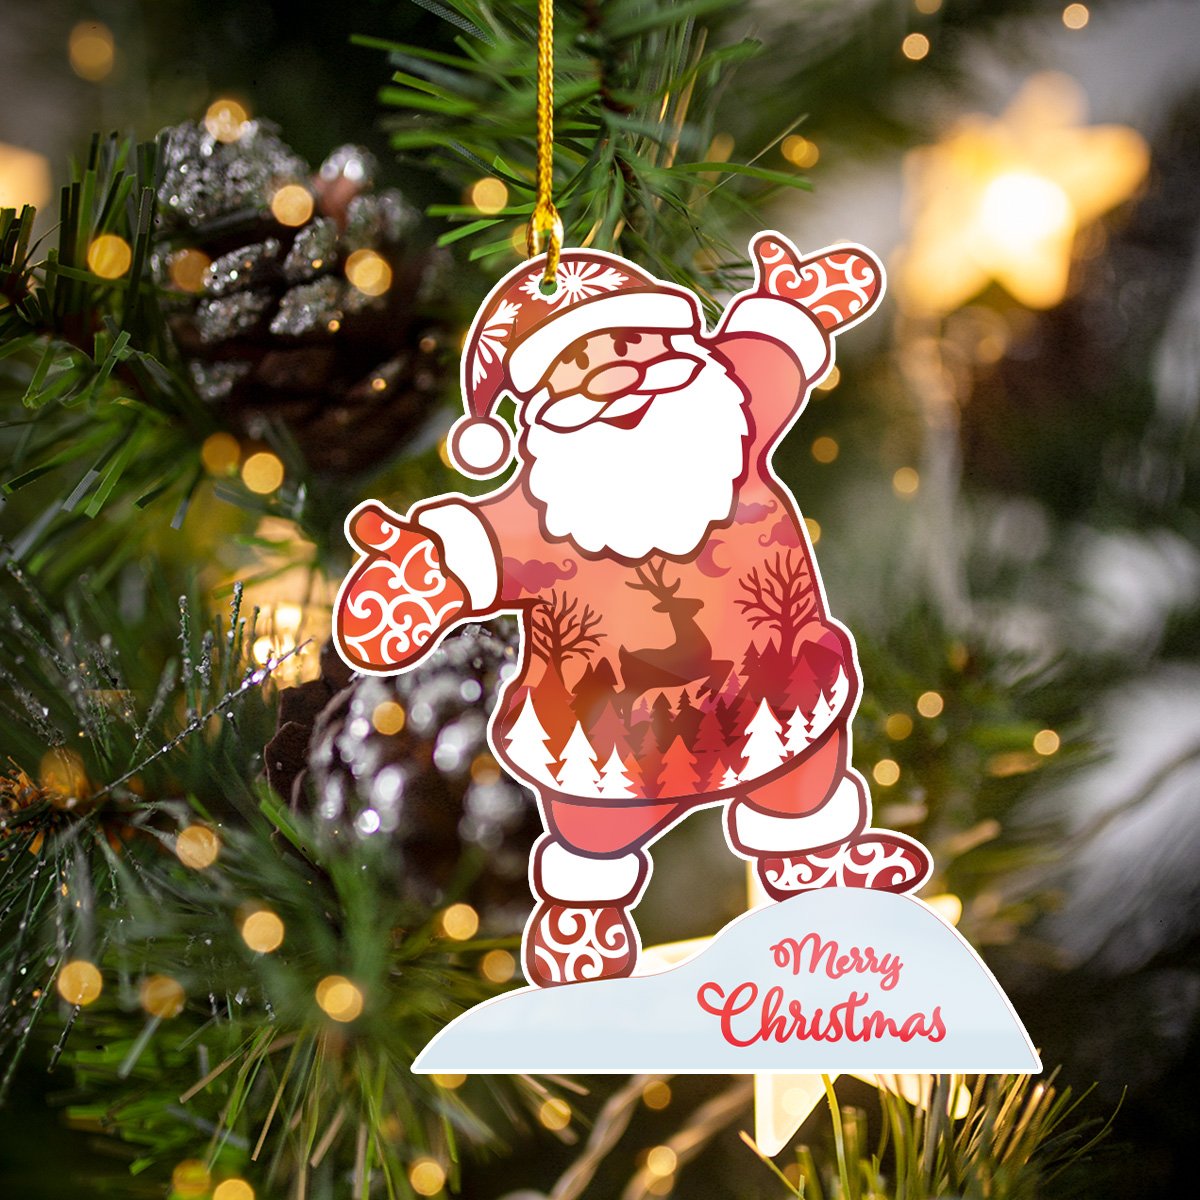 Merry Christmas Santa Claus Personalizedwitch Ornament